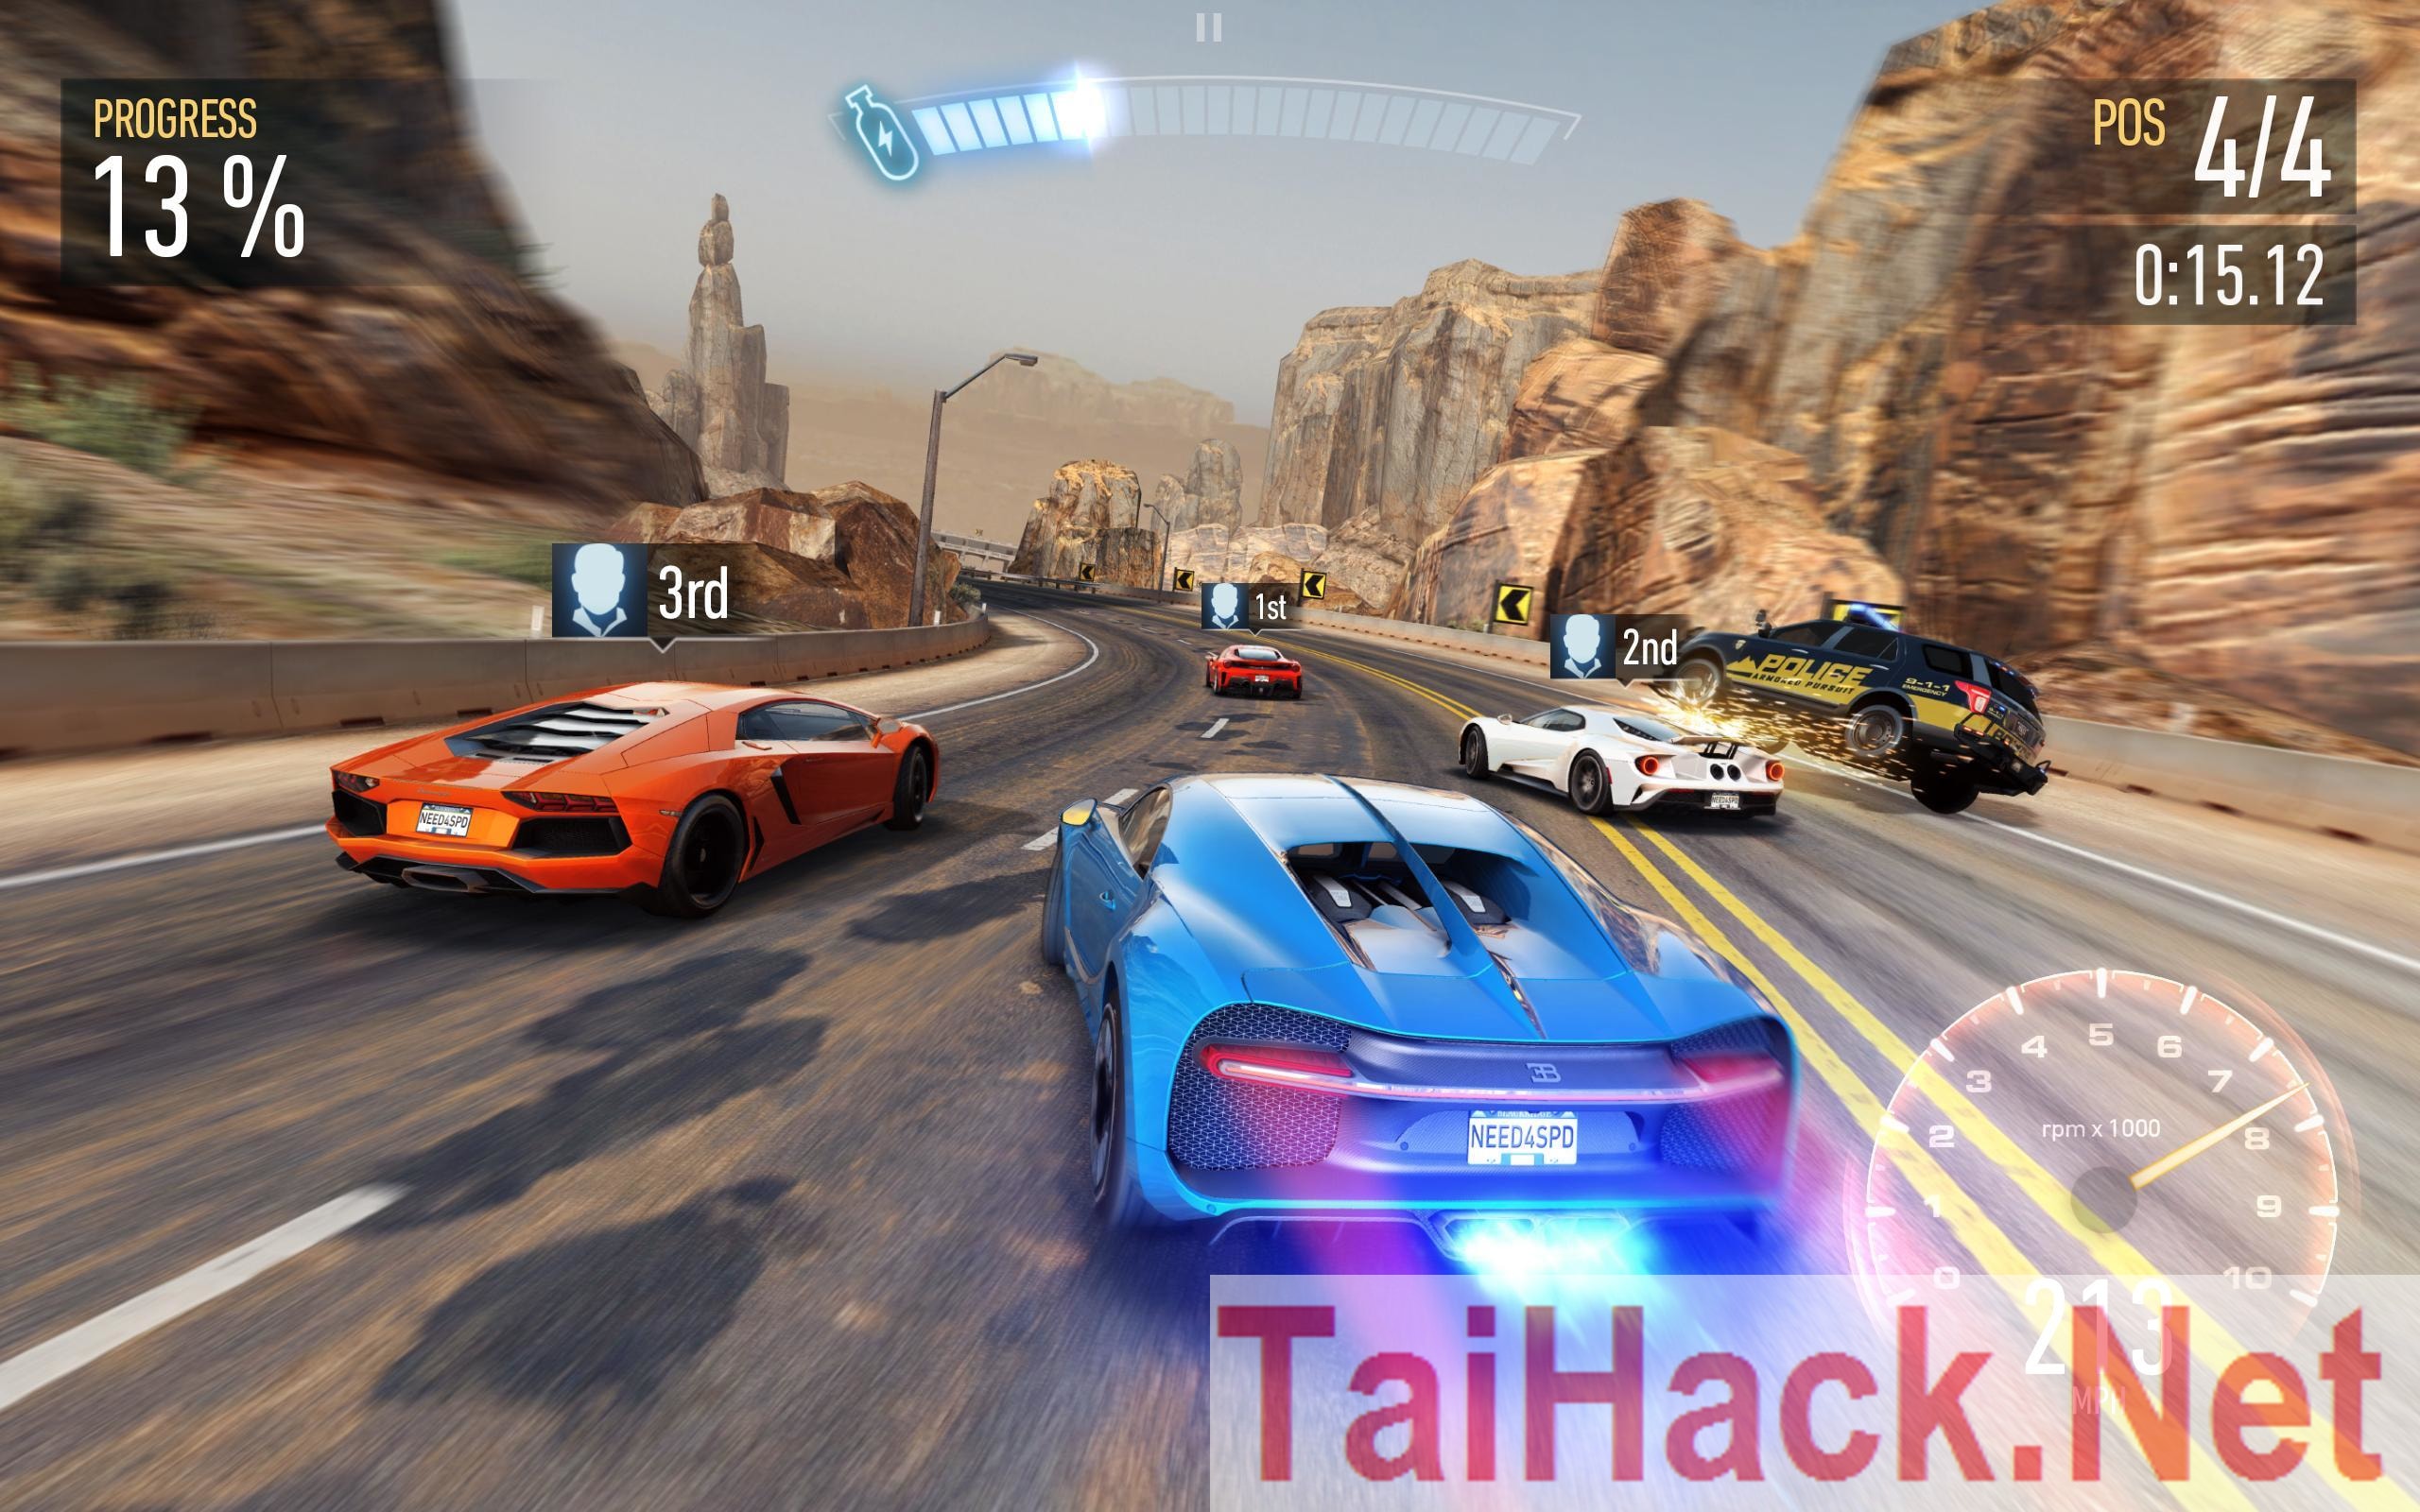 Download Hack Need for Speed No Limits - Best Car Racing Game On Android. This is the best car racing game of all time with epic scenery, beautiful graphics that will not disappoint the riders. With unlimited speed, you can comfortably conquer your race. Update all the latest hack game versions for free daily at TaiHack.Net.